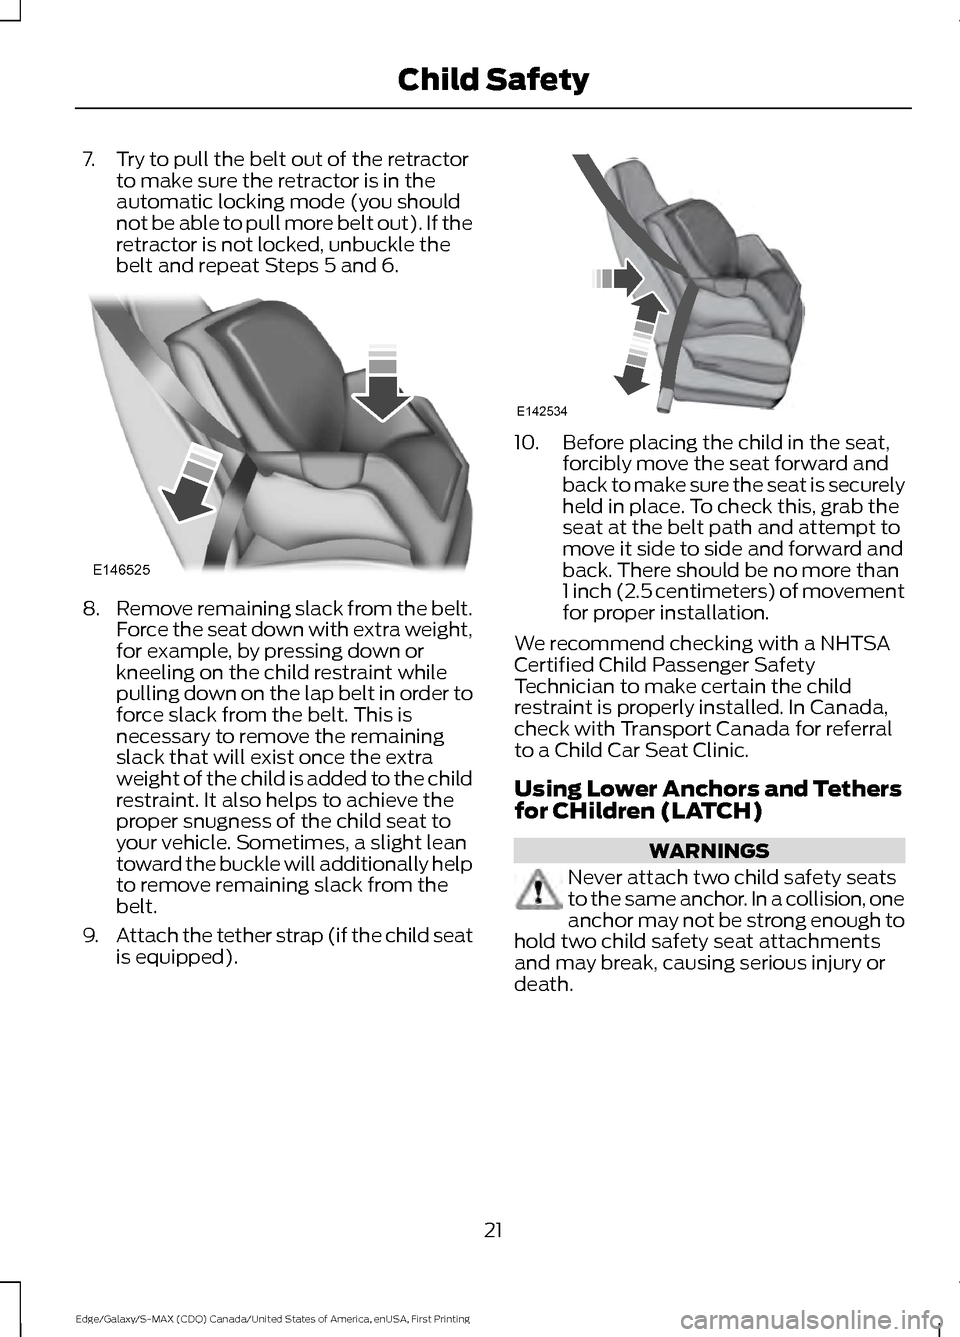 FORD EDGE 2016 2.G Owners Manual 7. Try to pull the belt out of the retractor
to make sure the retractor is in the
automatic locking mode (you should
not be able to pull more belt out). If the
retractor is not locked, unbuckle the
be